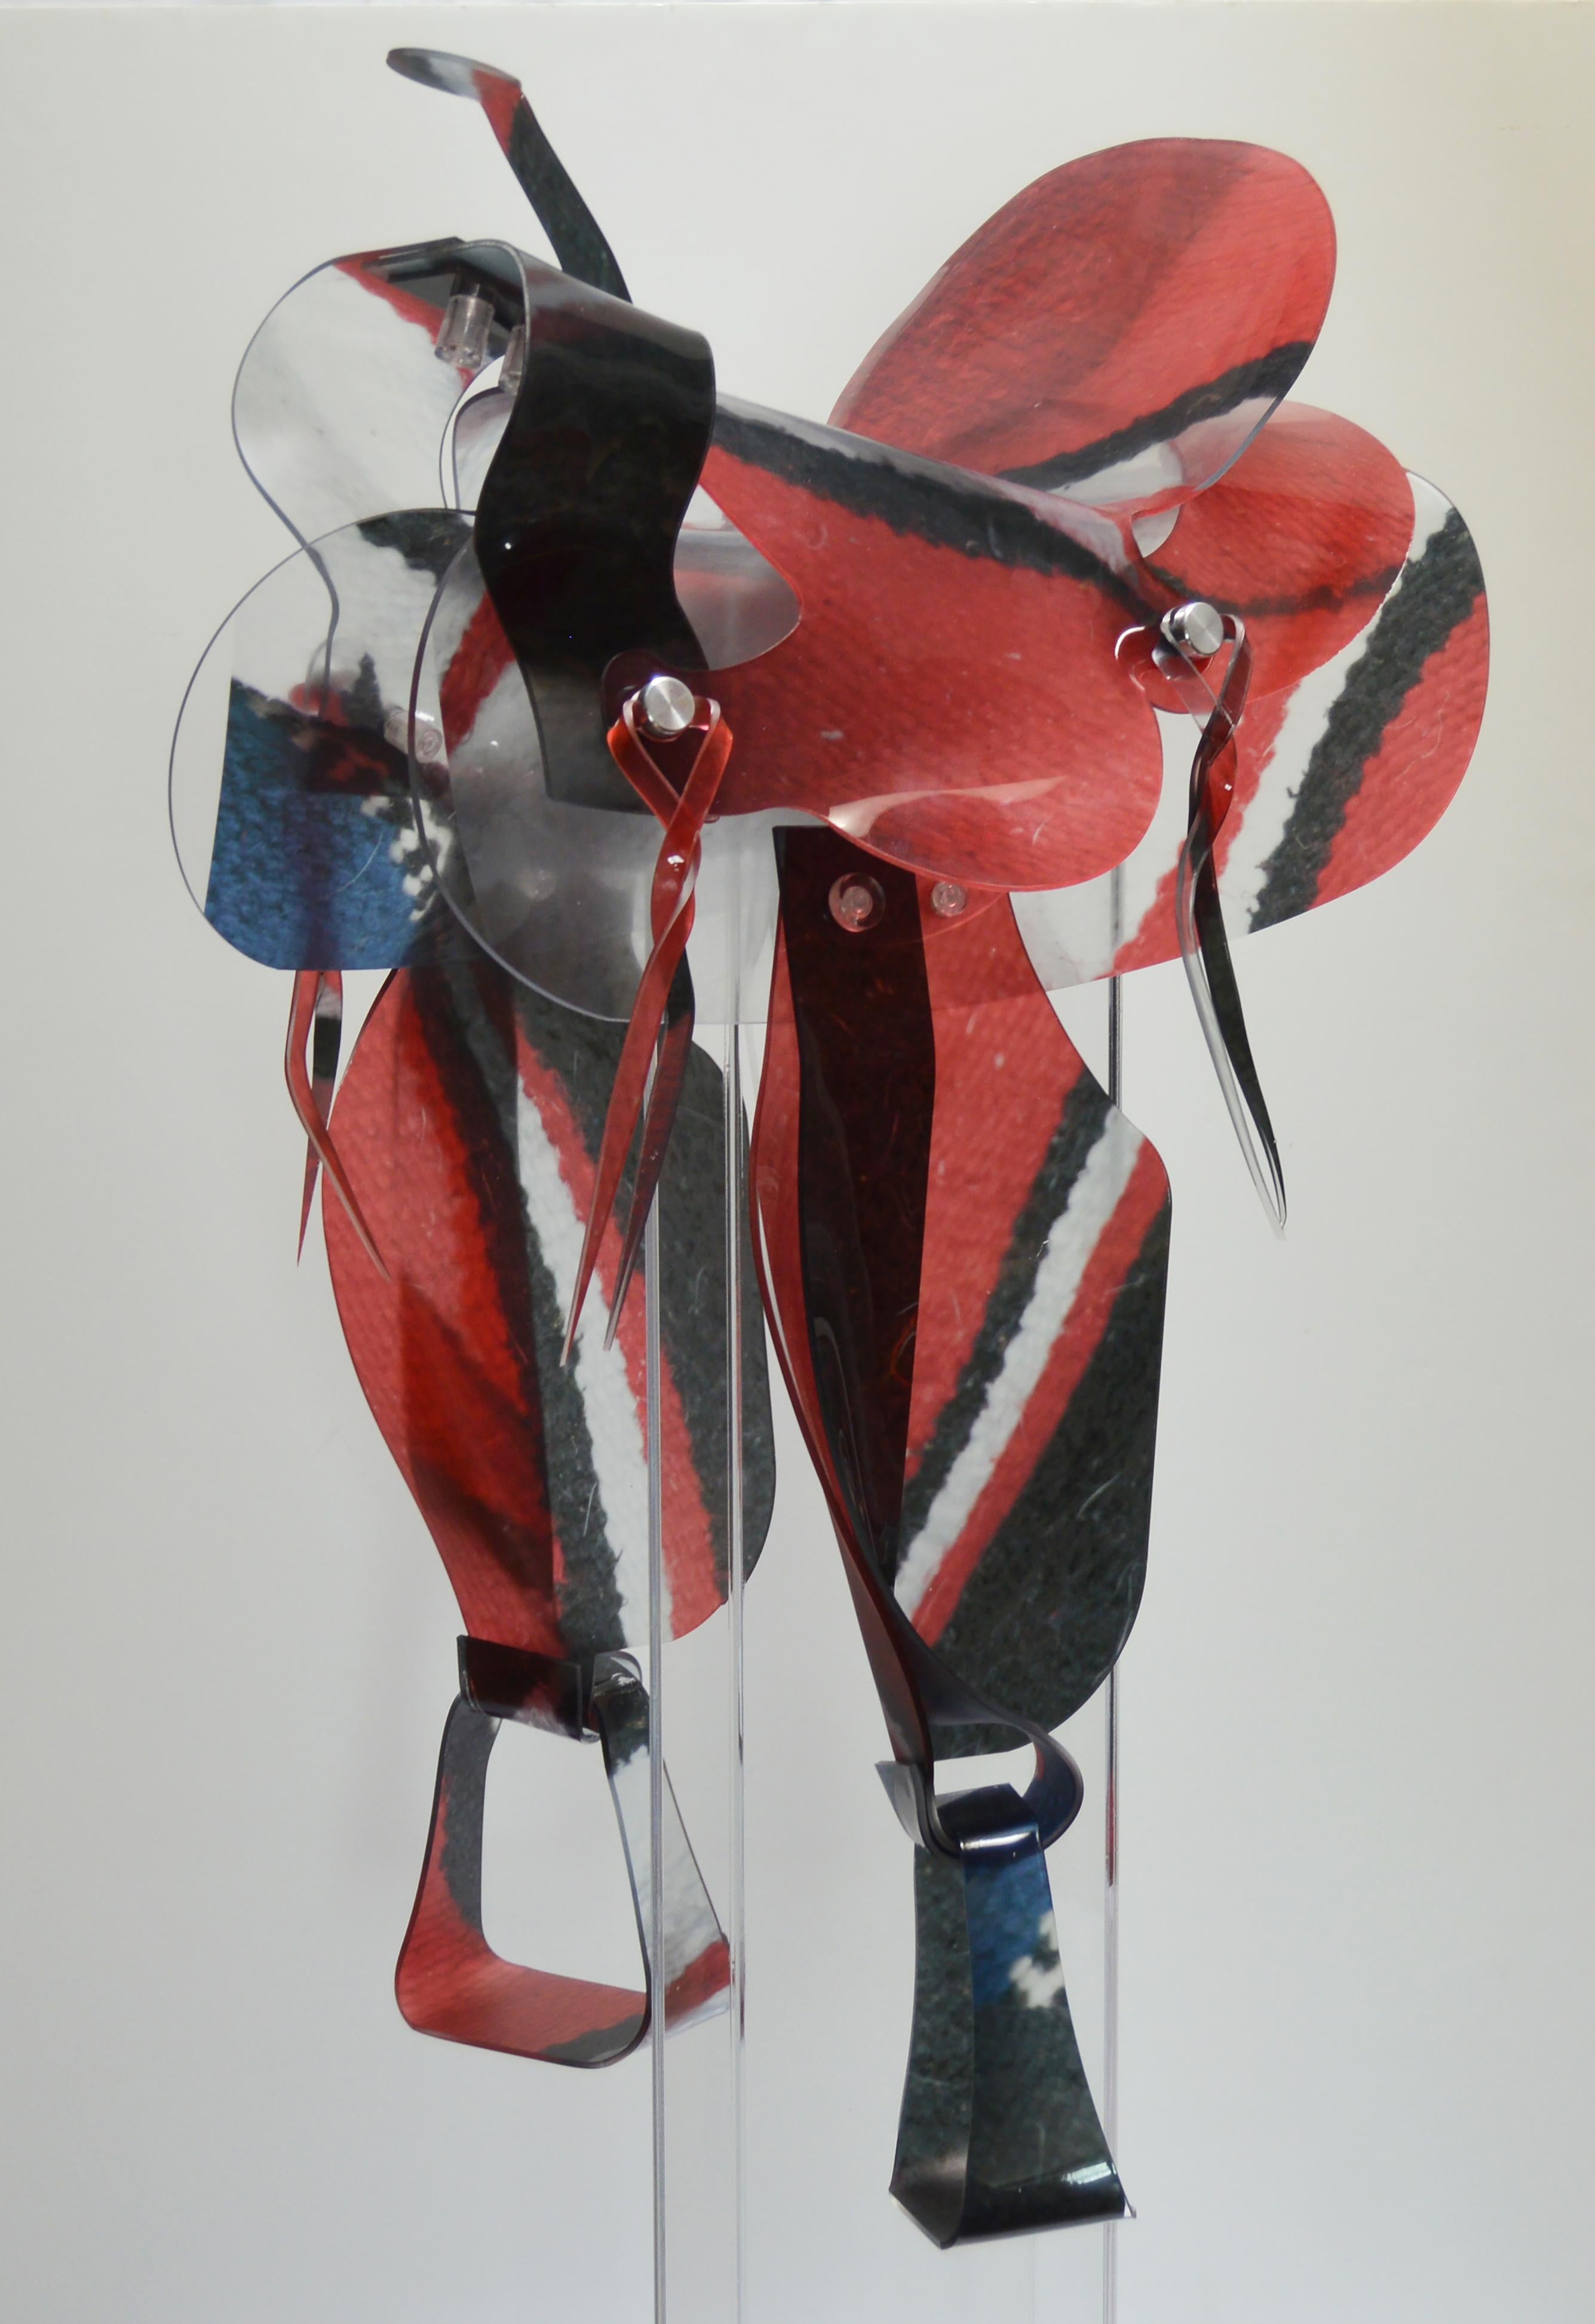 Maeve Eichelberger Figurative Sculpture - "Territory" -  UV inks printed on acrylic hand formed